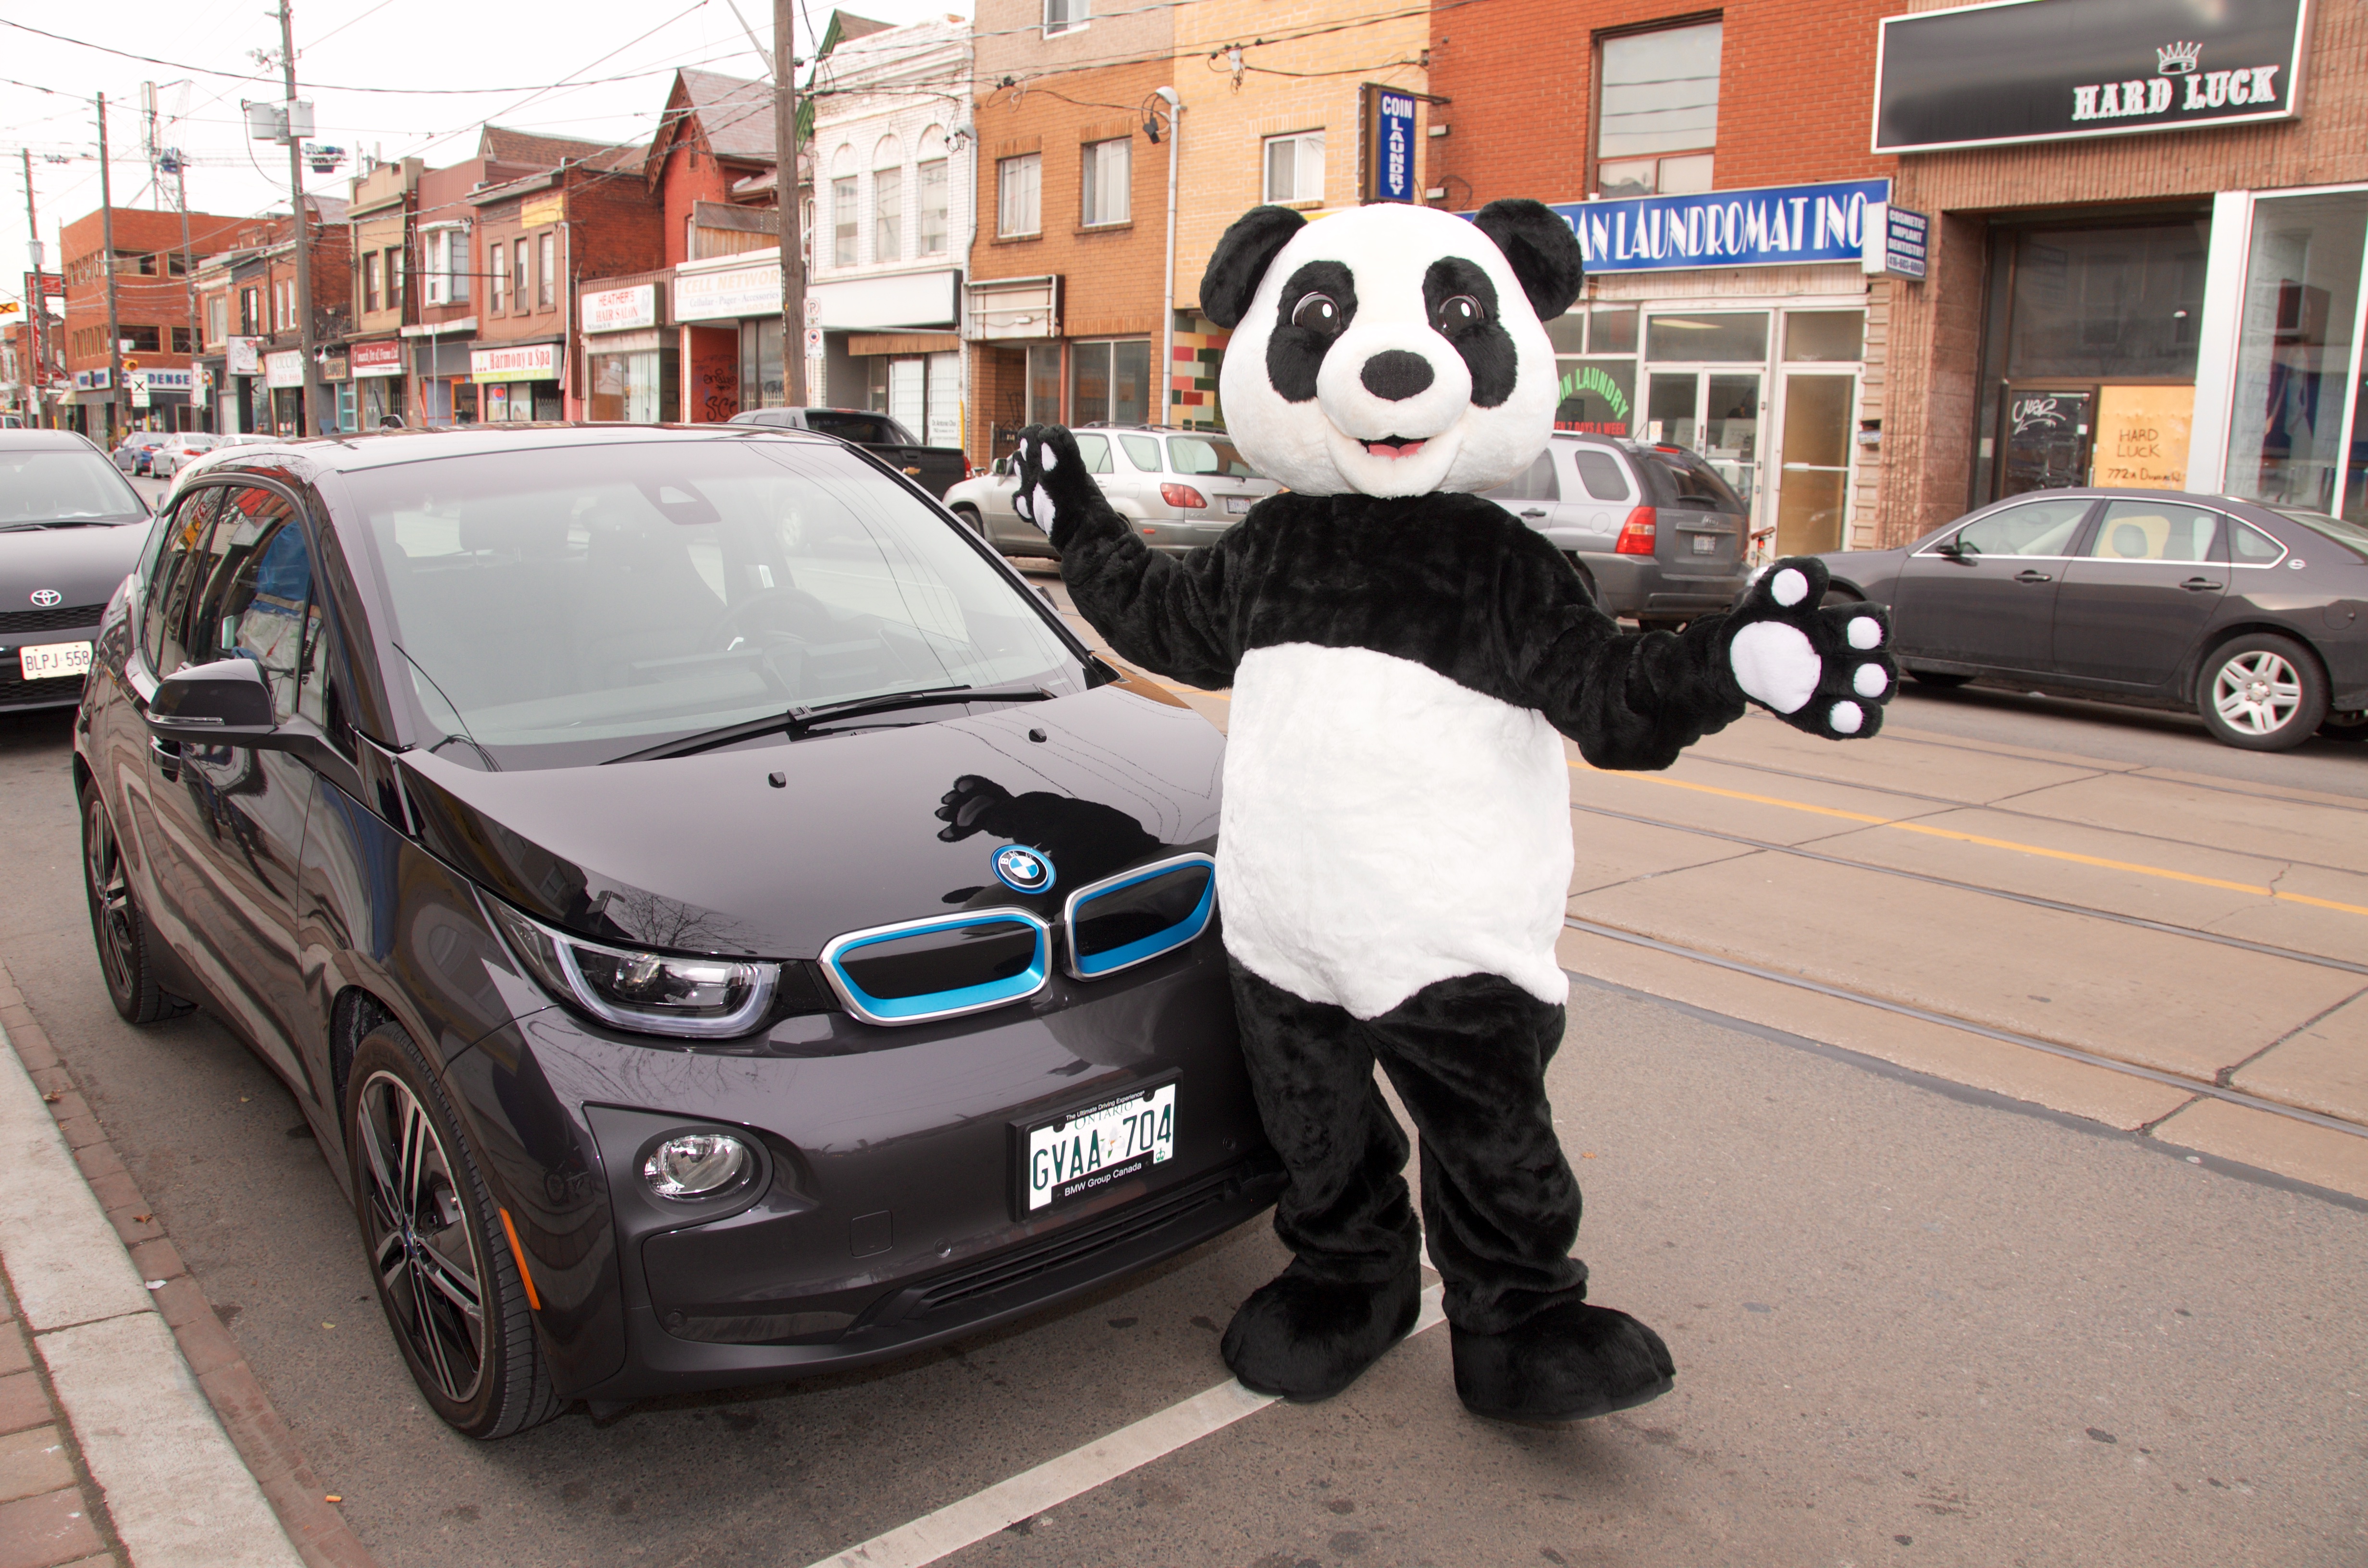 I don't think he drove the car to the restaurant. Photo courtesy WWF Canada.